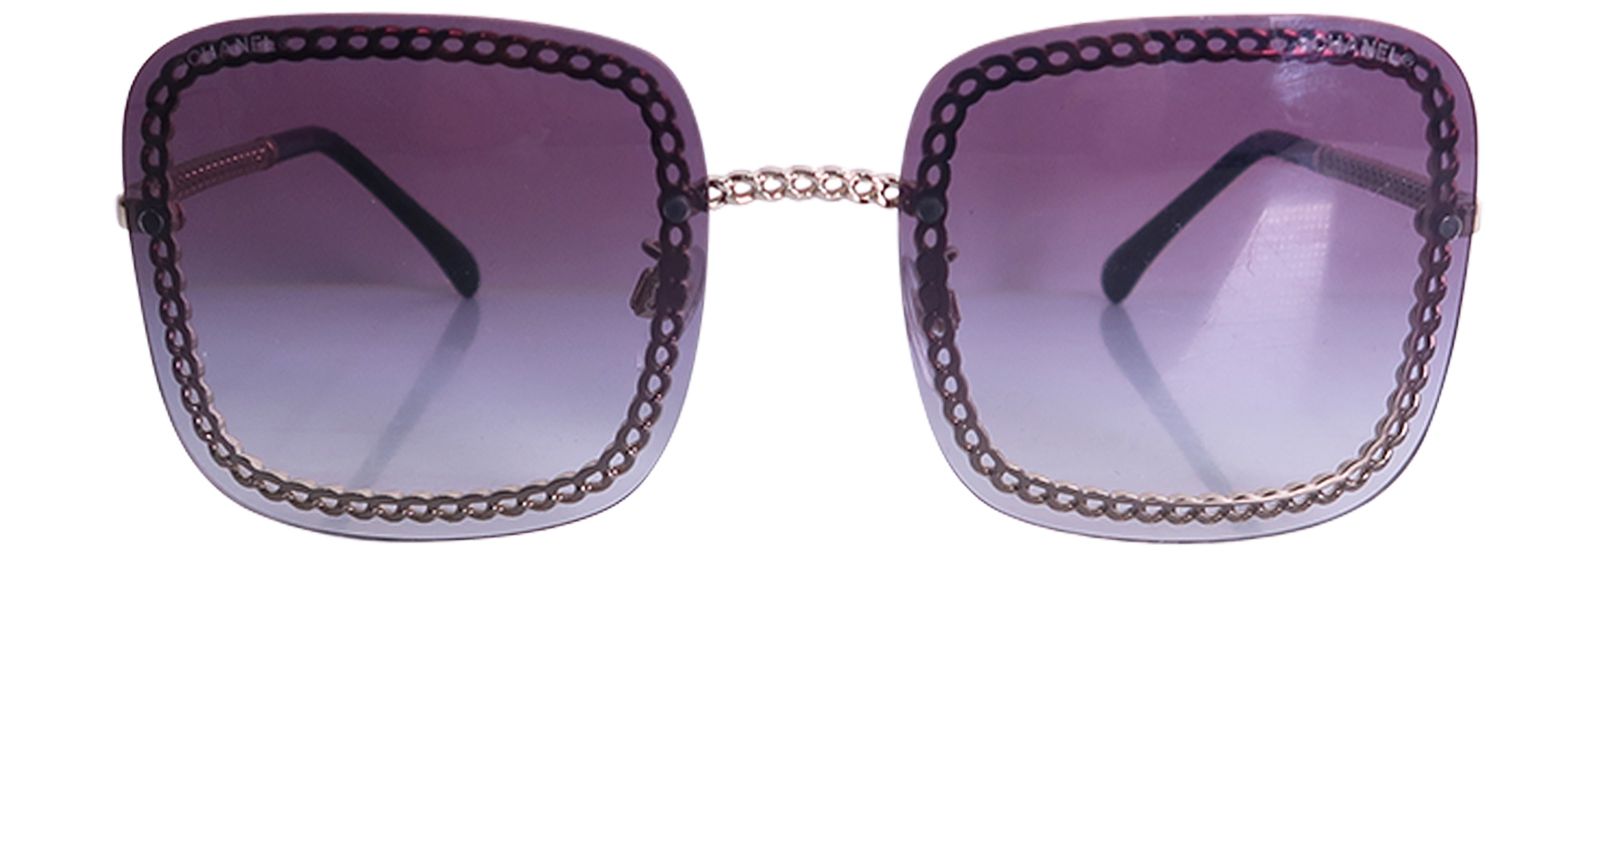 Chanel Sunglasses - Prestige Online Store - Luxury Items with Exceptional  Savings from the eShop